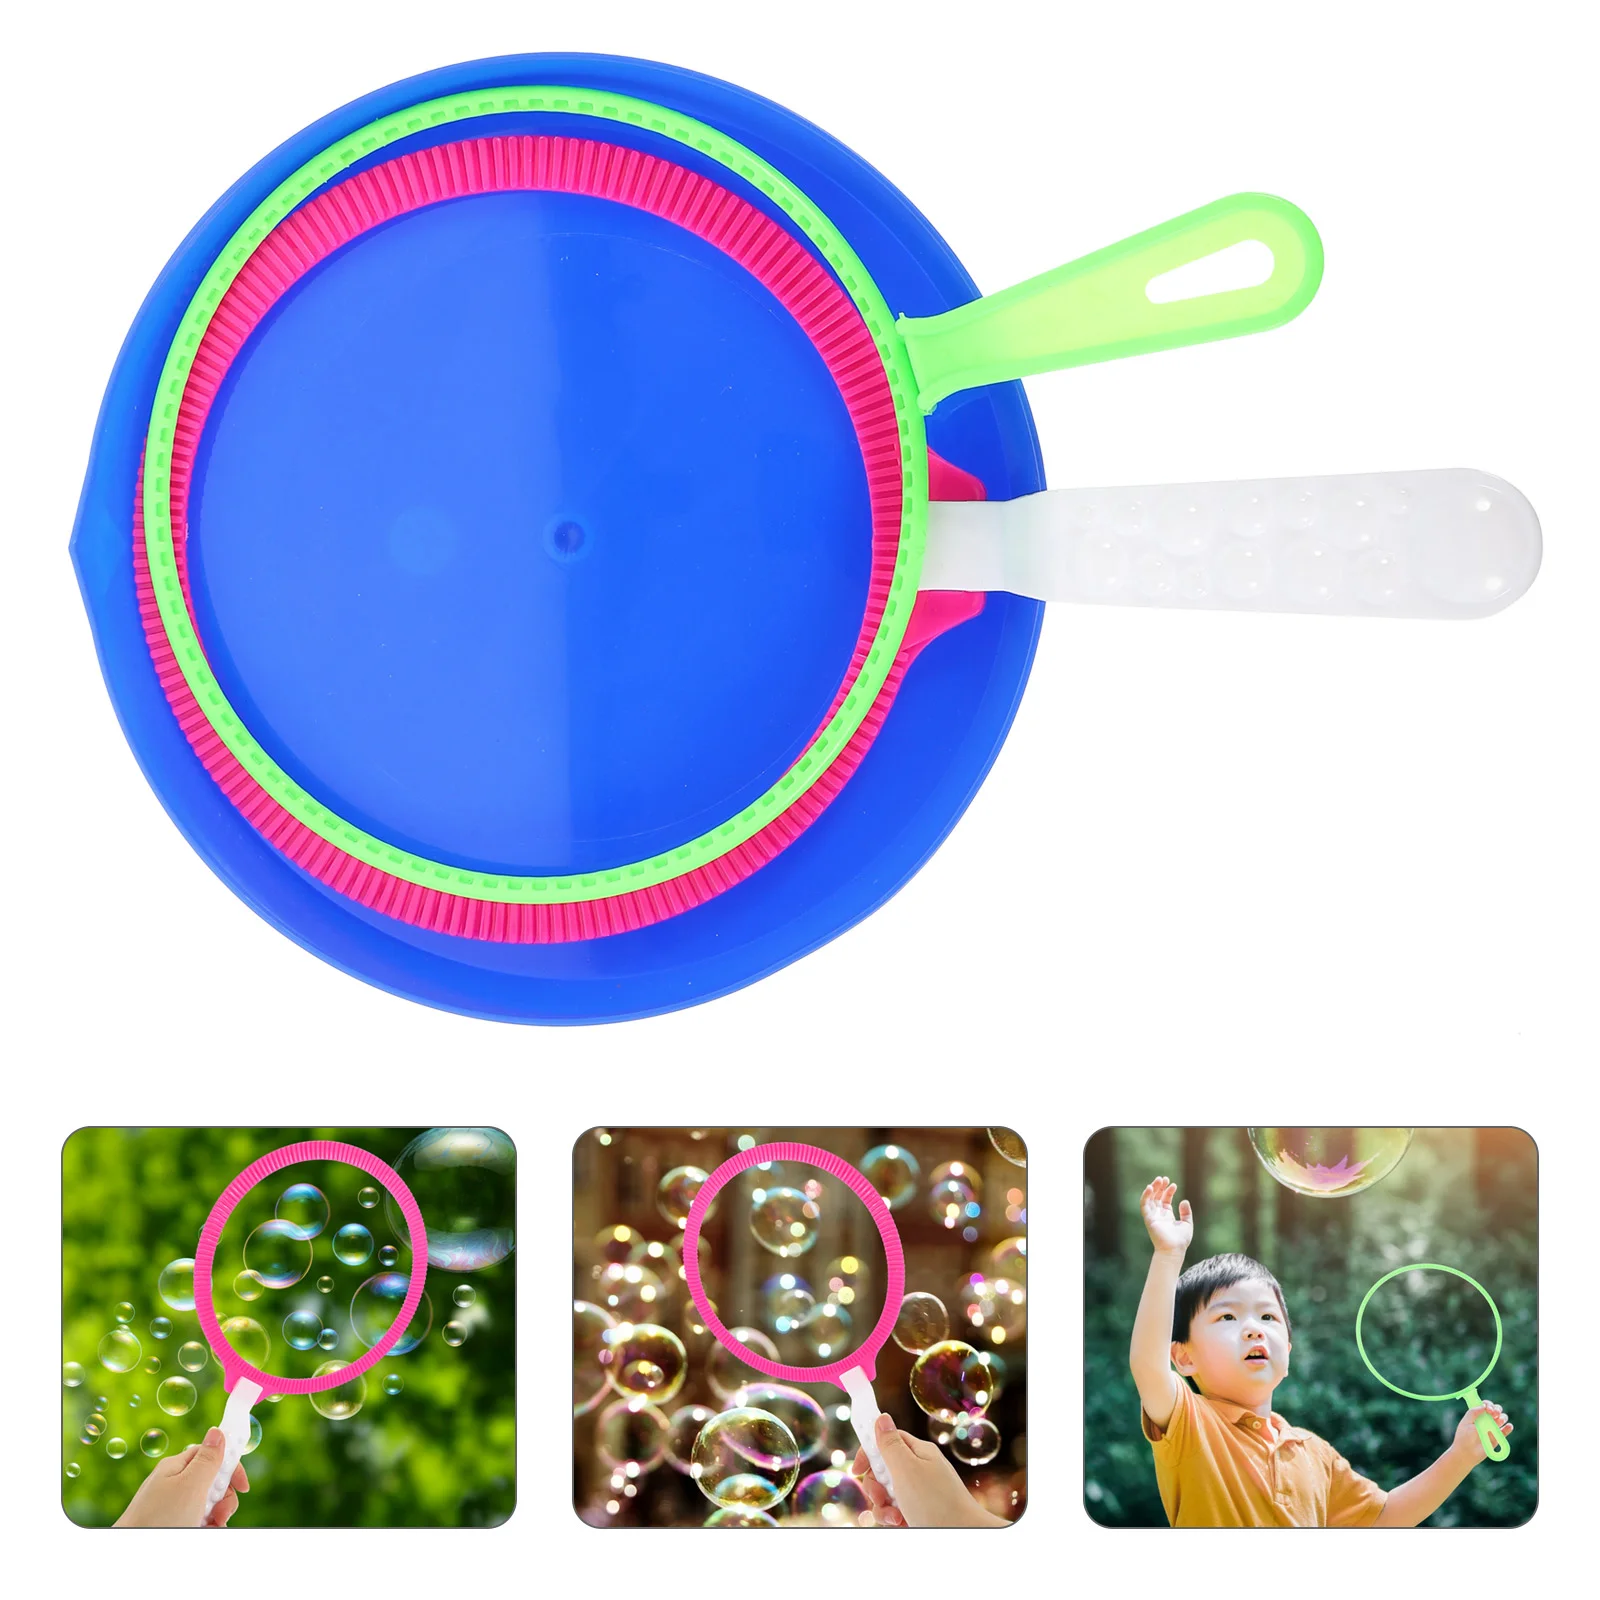 

Bubble Wands Set Big Bubbles Wand Funny Bubbles Maker Big Bubble Wands with Tray for Outdoor Activity Birthday Party Games 3pcs